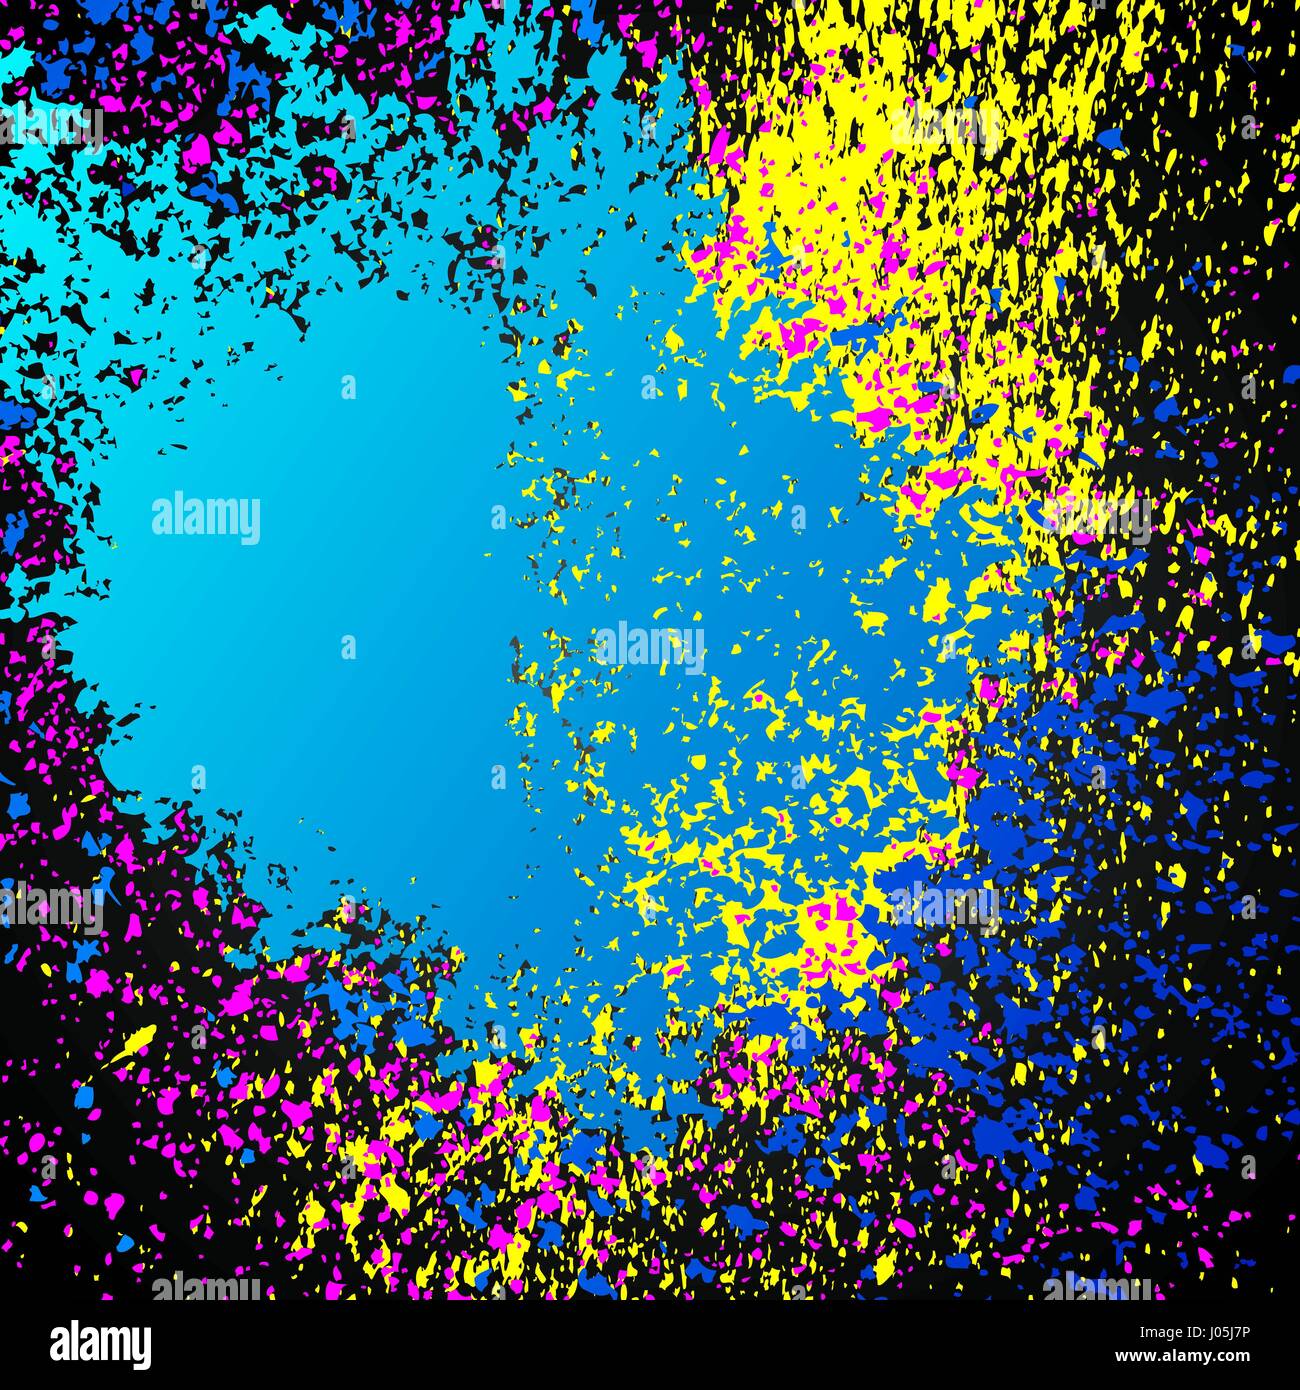 Colorful acrylic explosion paint splatter vector. Small drops, spots